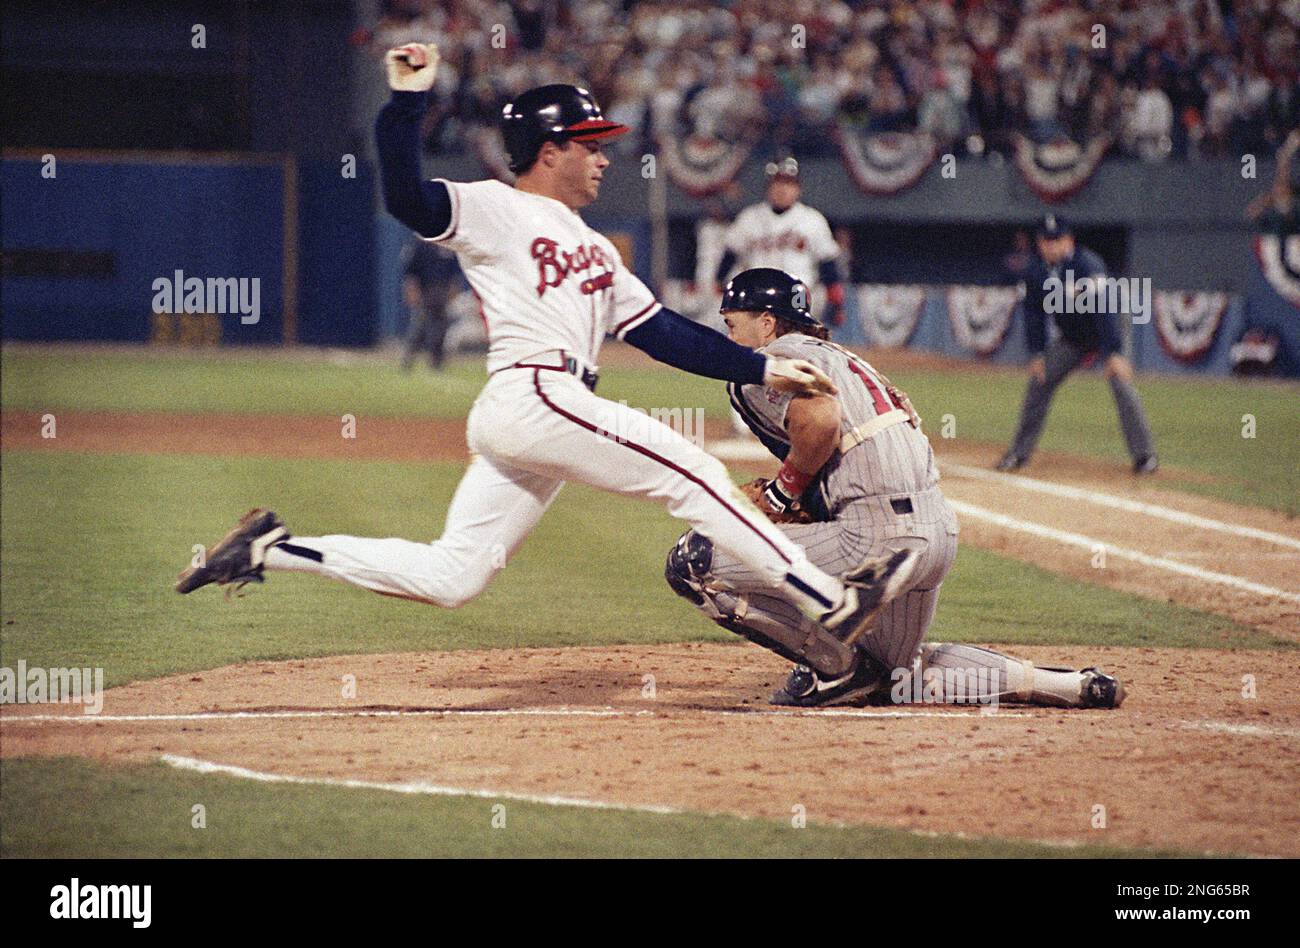 Atlanata Braves Mark Lemke slides home safely past Minnesota Twins catcher  Brian Harper to score the game-winning run in the 9th inning of Wednesday's  World Series game. In the early hours of